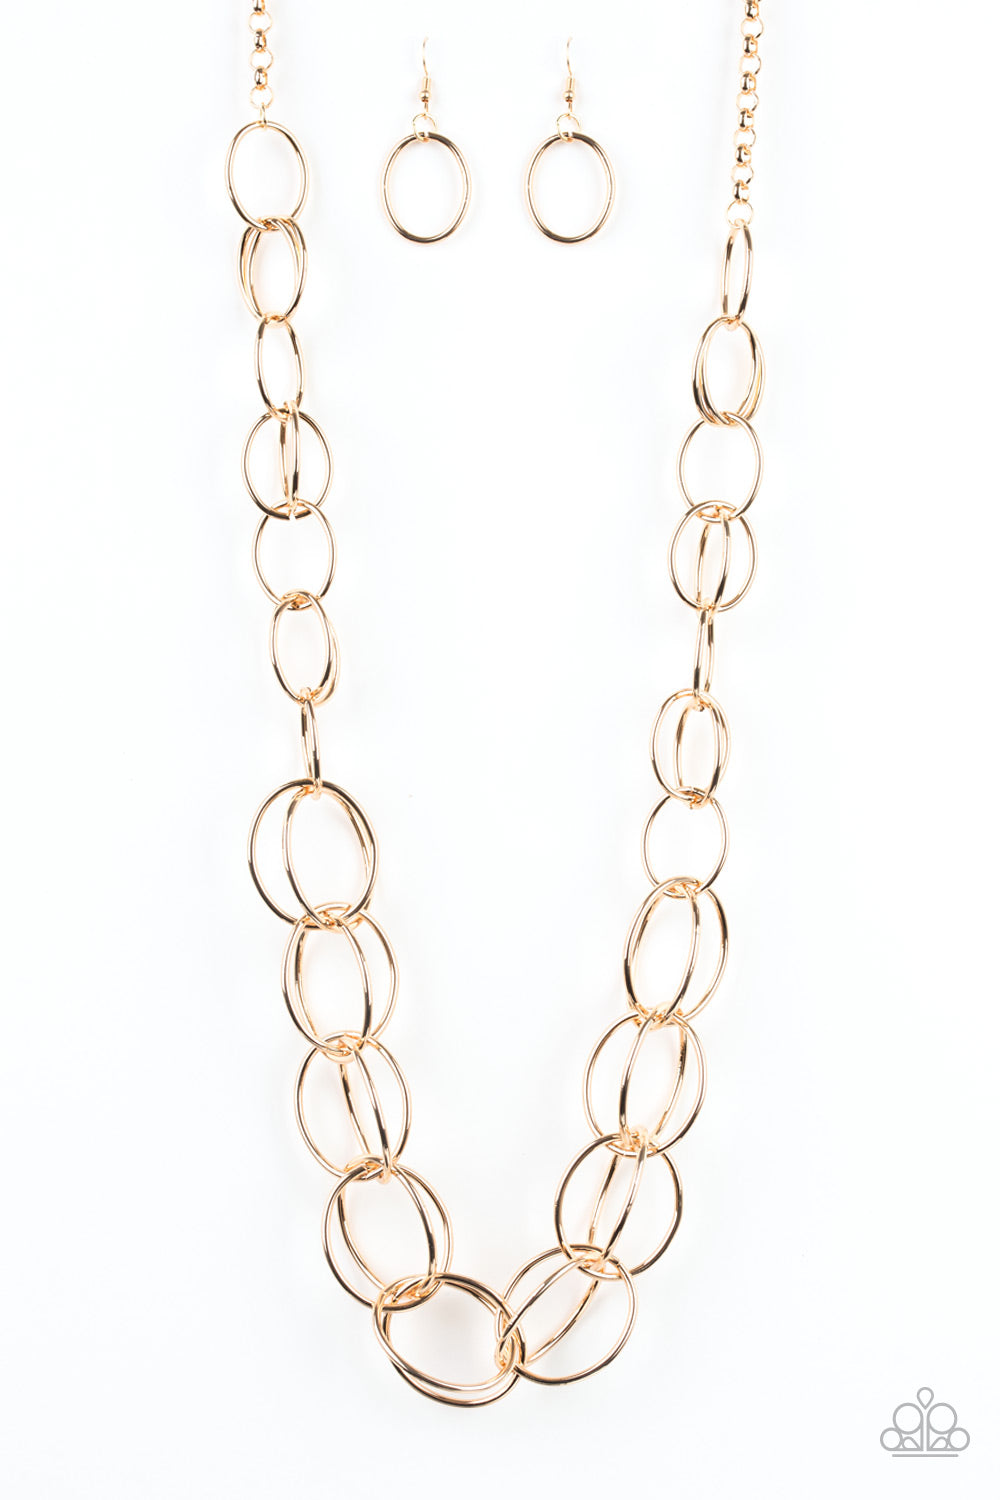 Paparazzi Accessories Elegantly Ensnared - Gold Necklaces - Lady T Accessories